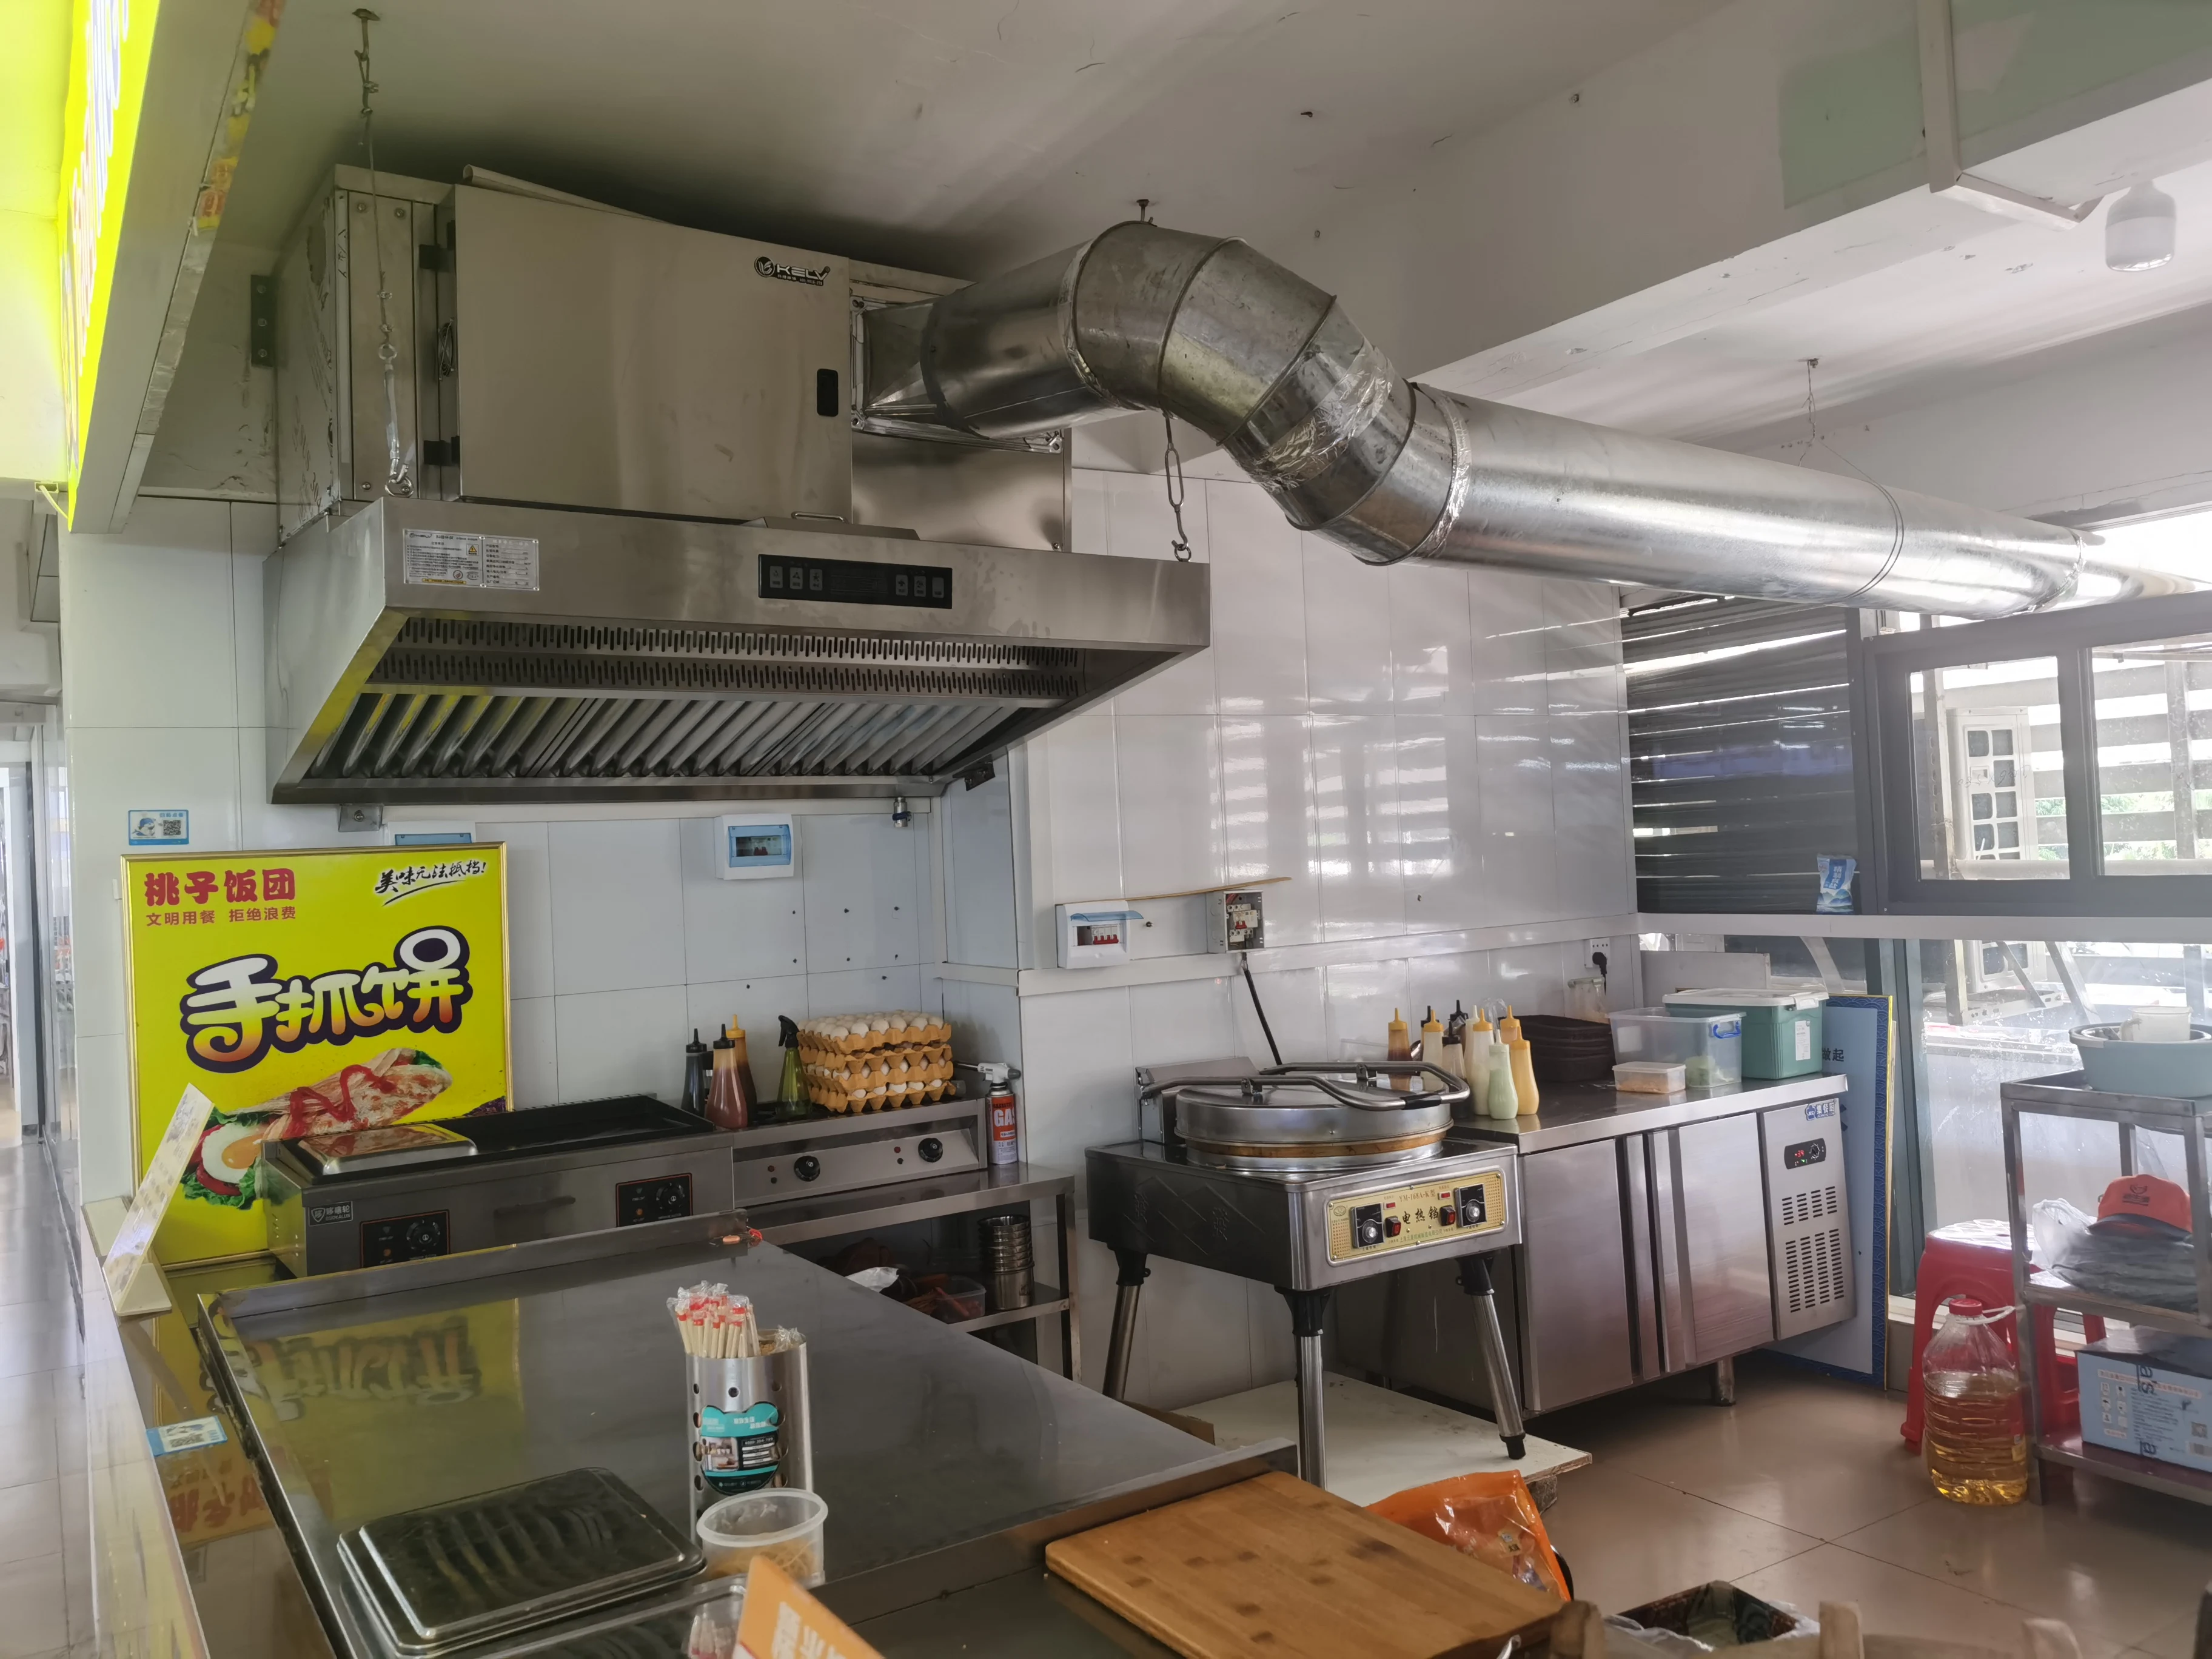 Ventless Hood System Commercial Kitchen With Electrostatic Precipitator For Filter Kitchen Exhaust Fume Grease Smell Length 1500